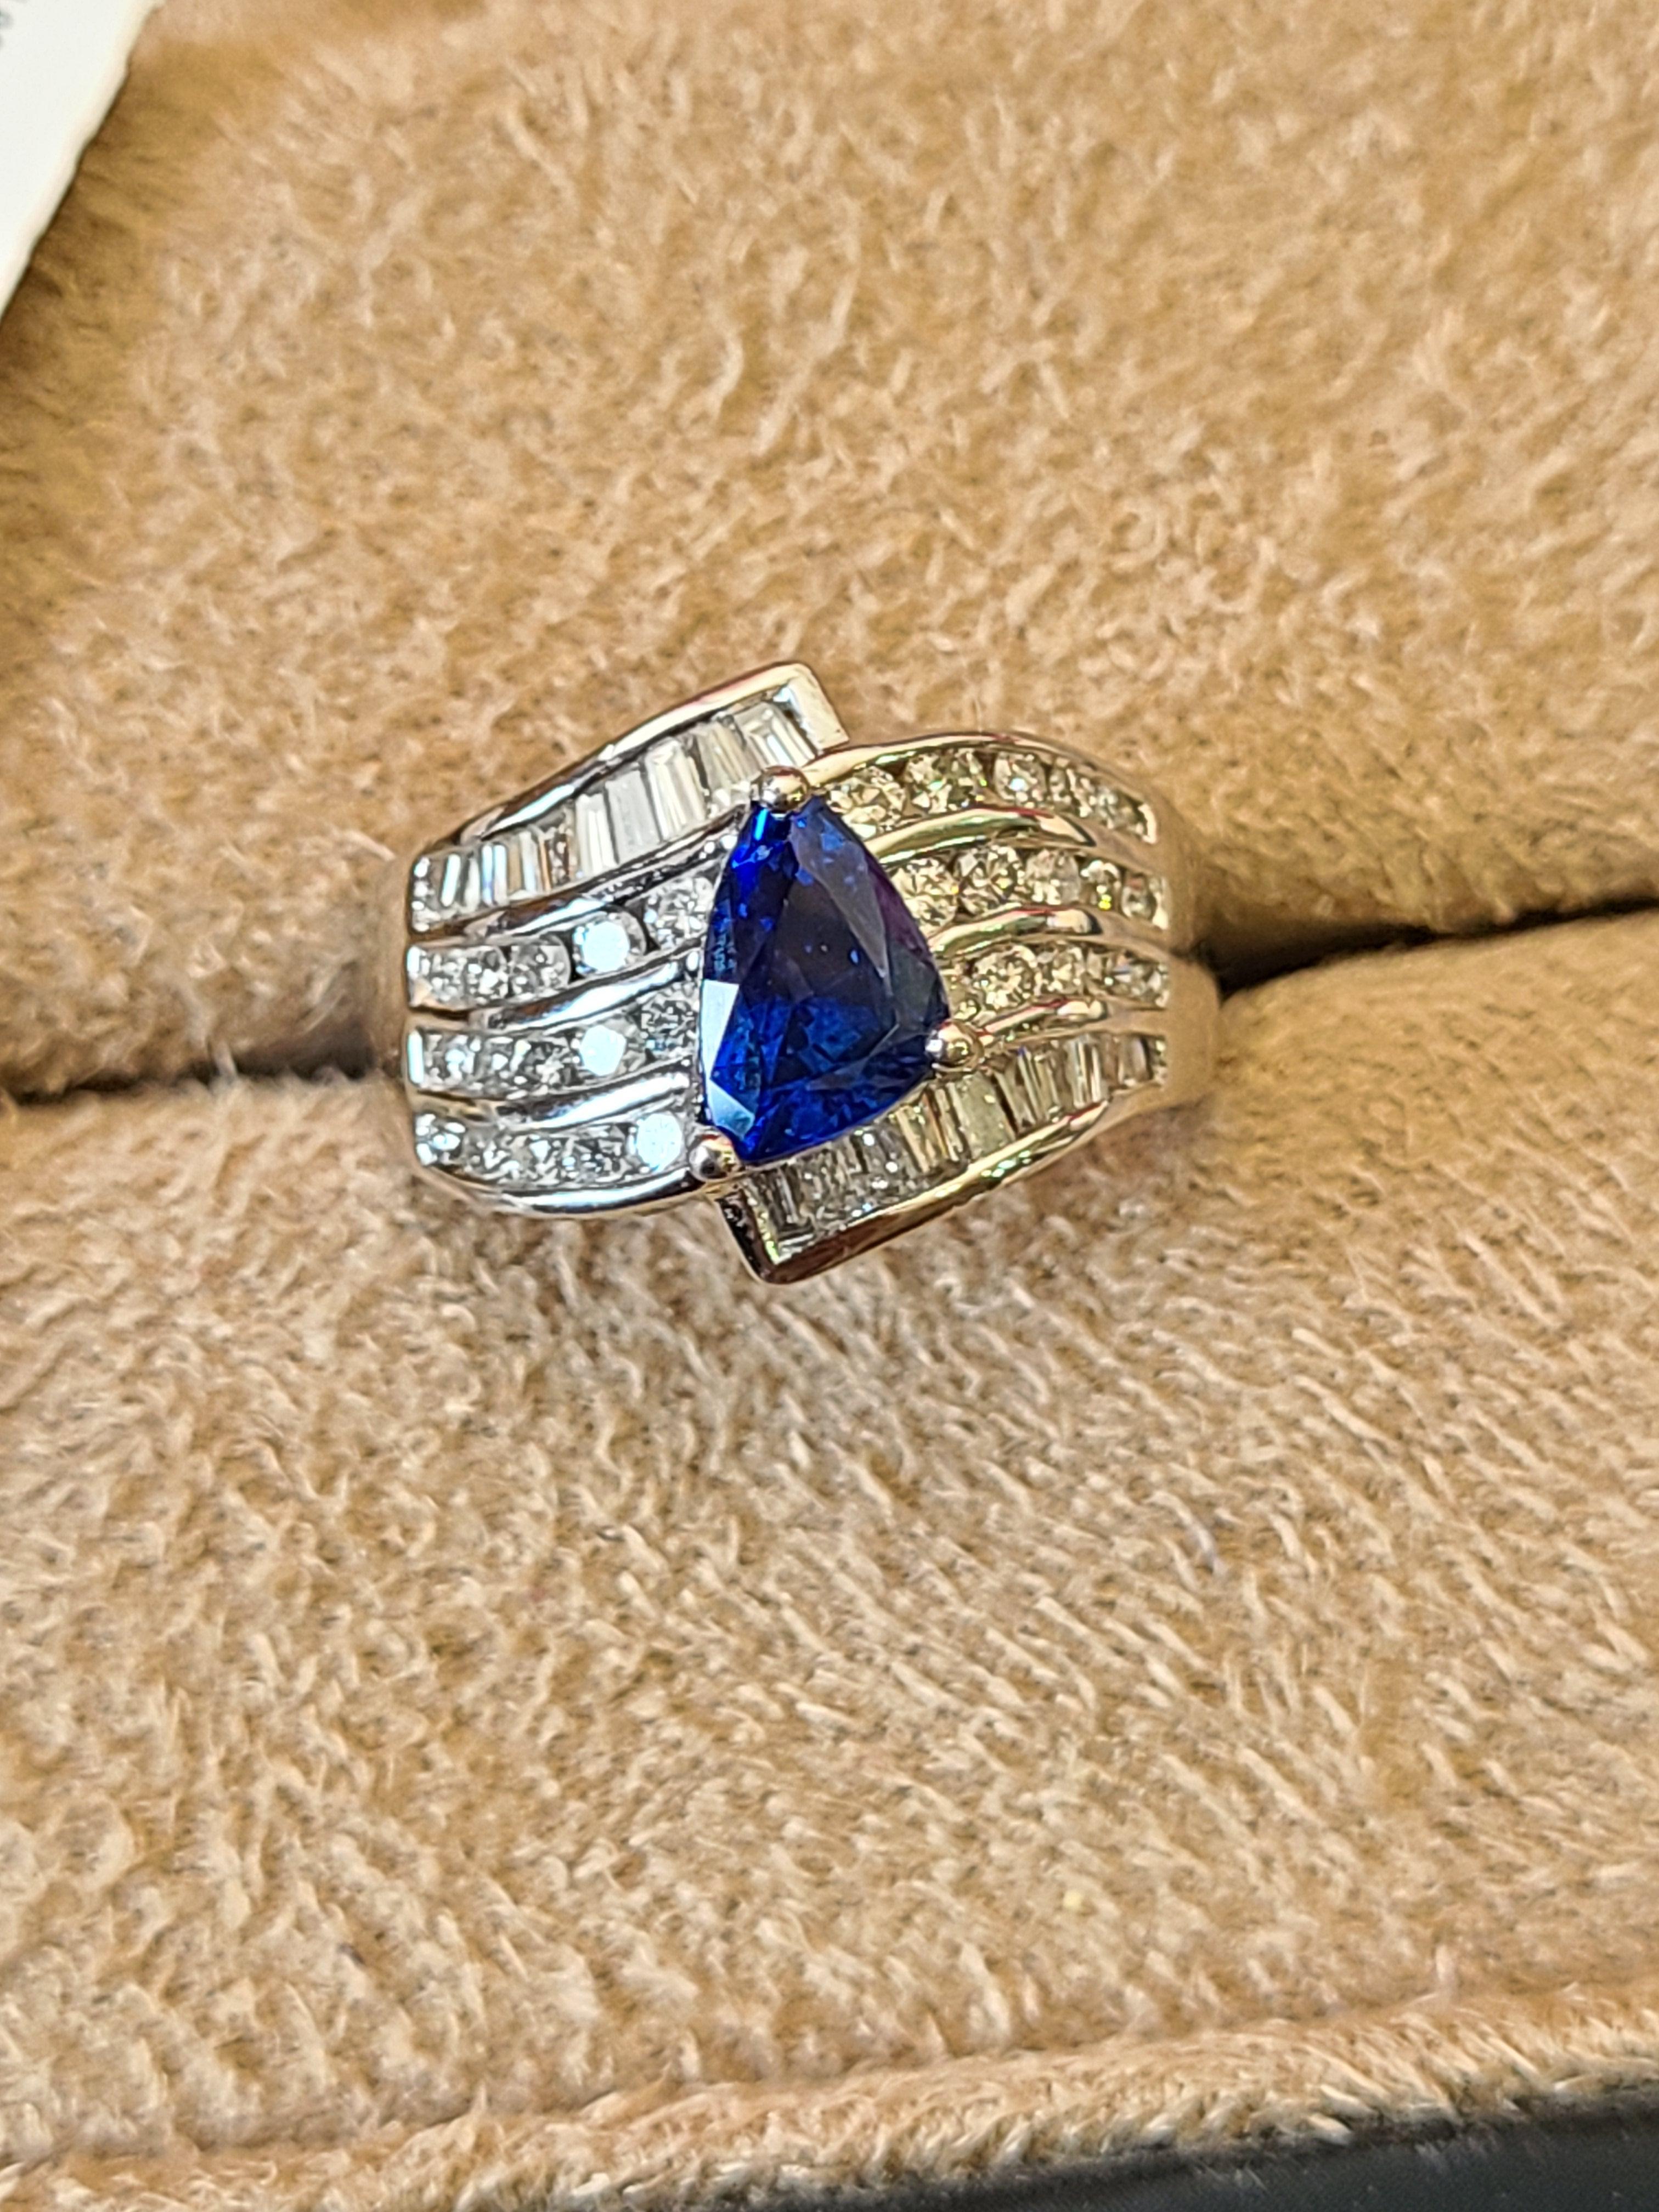 A top quality sapphire set in Platinum PT900 with diamonds. The blue sapphire originates from Sri-Lanka and is eye clean and top colour , weight of the sapphire is 1.59 carats and diamond weight is 1.11 carats. The ring dimensions in cm 1.4 x 2 x